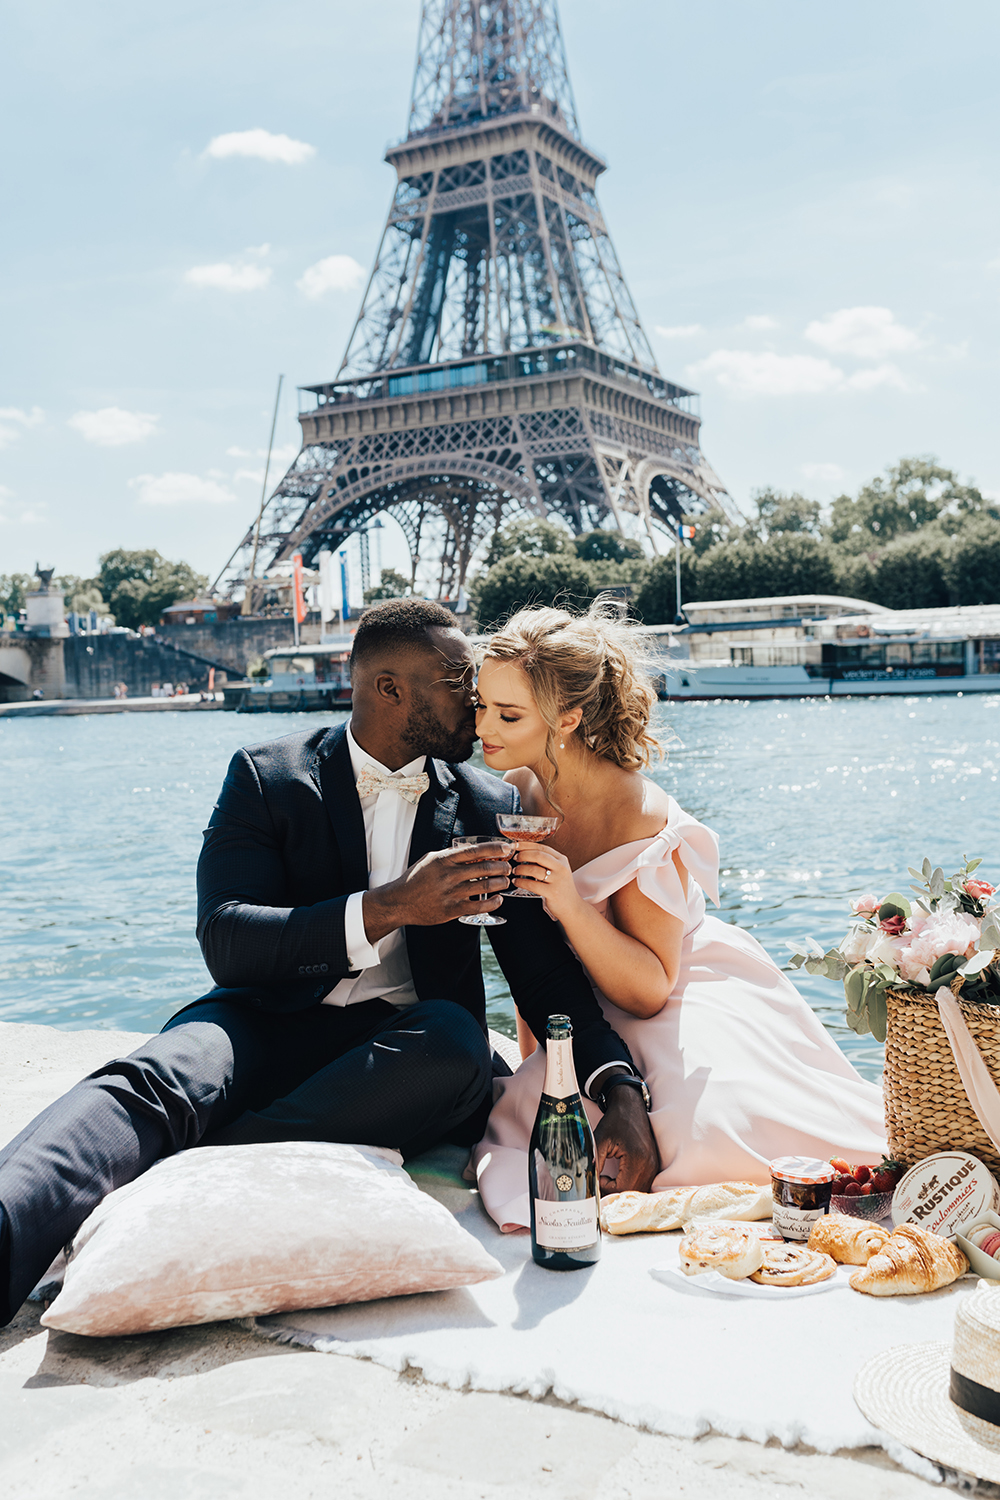 French engagement, picnic on the river, hair and makeup by Storme